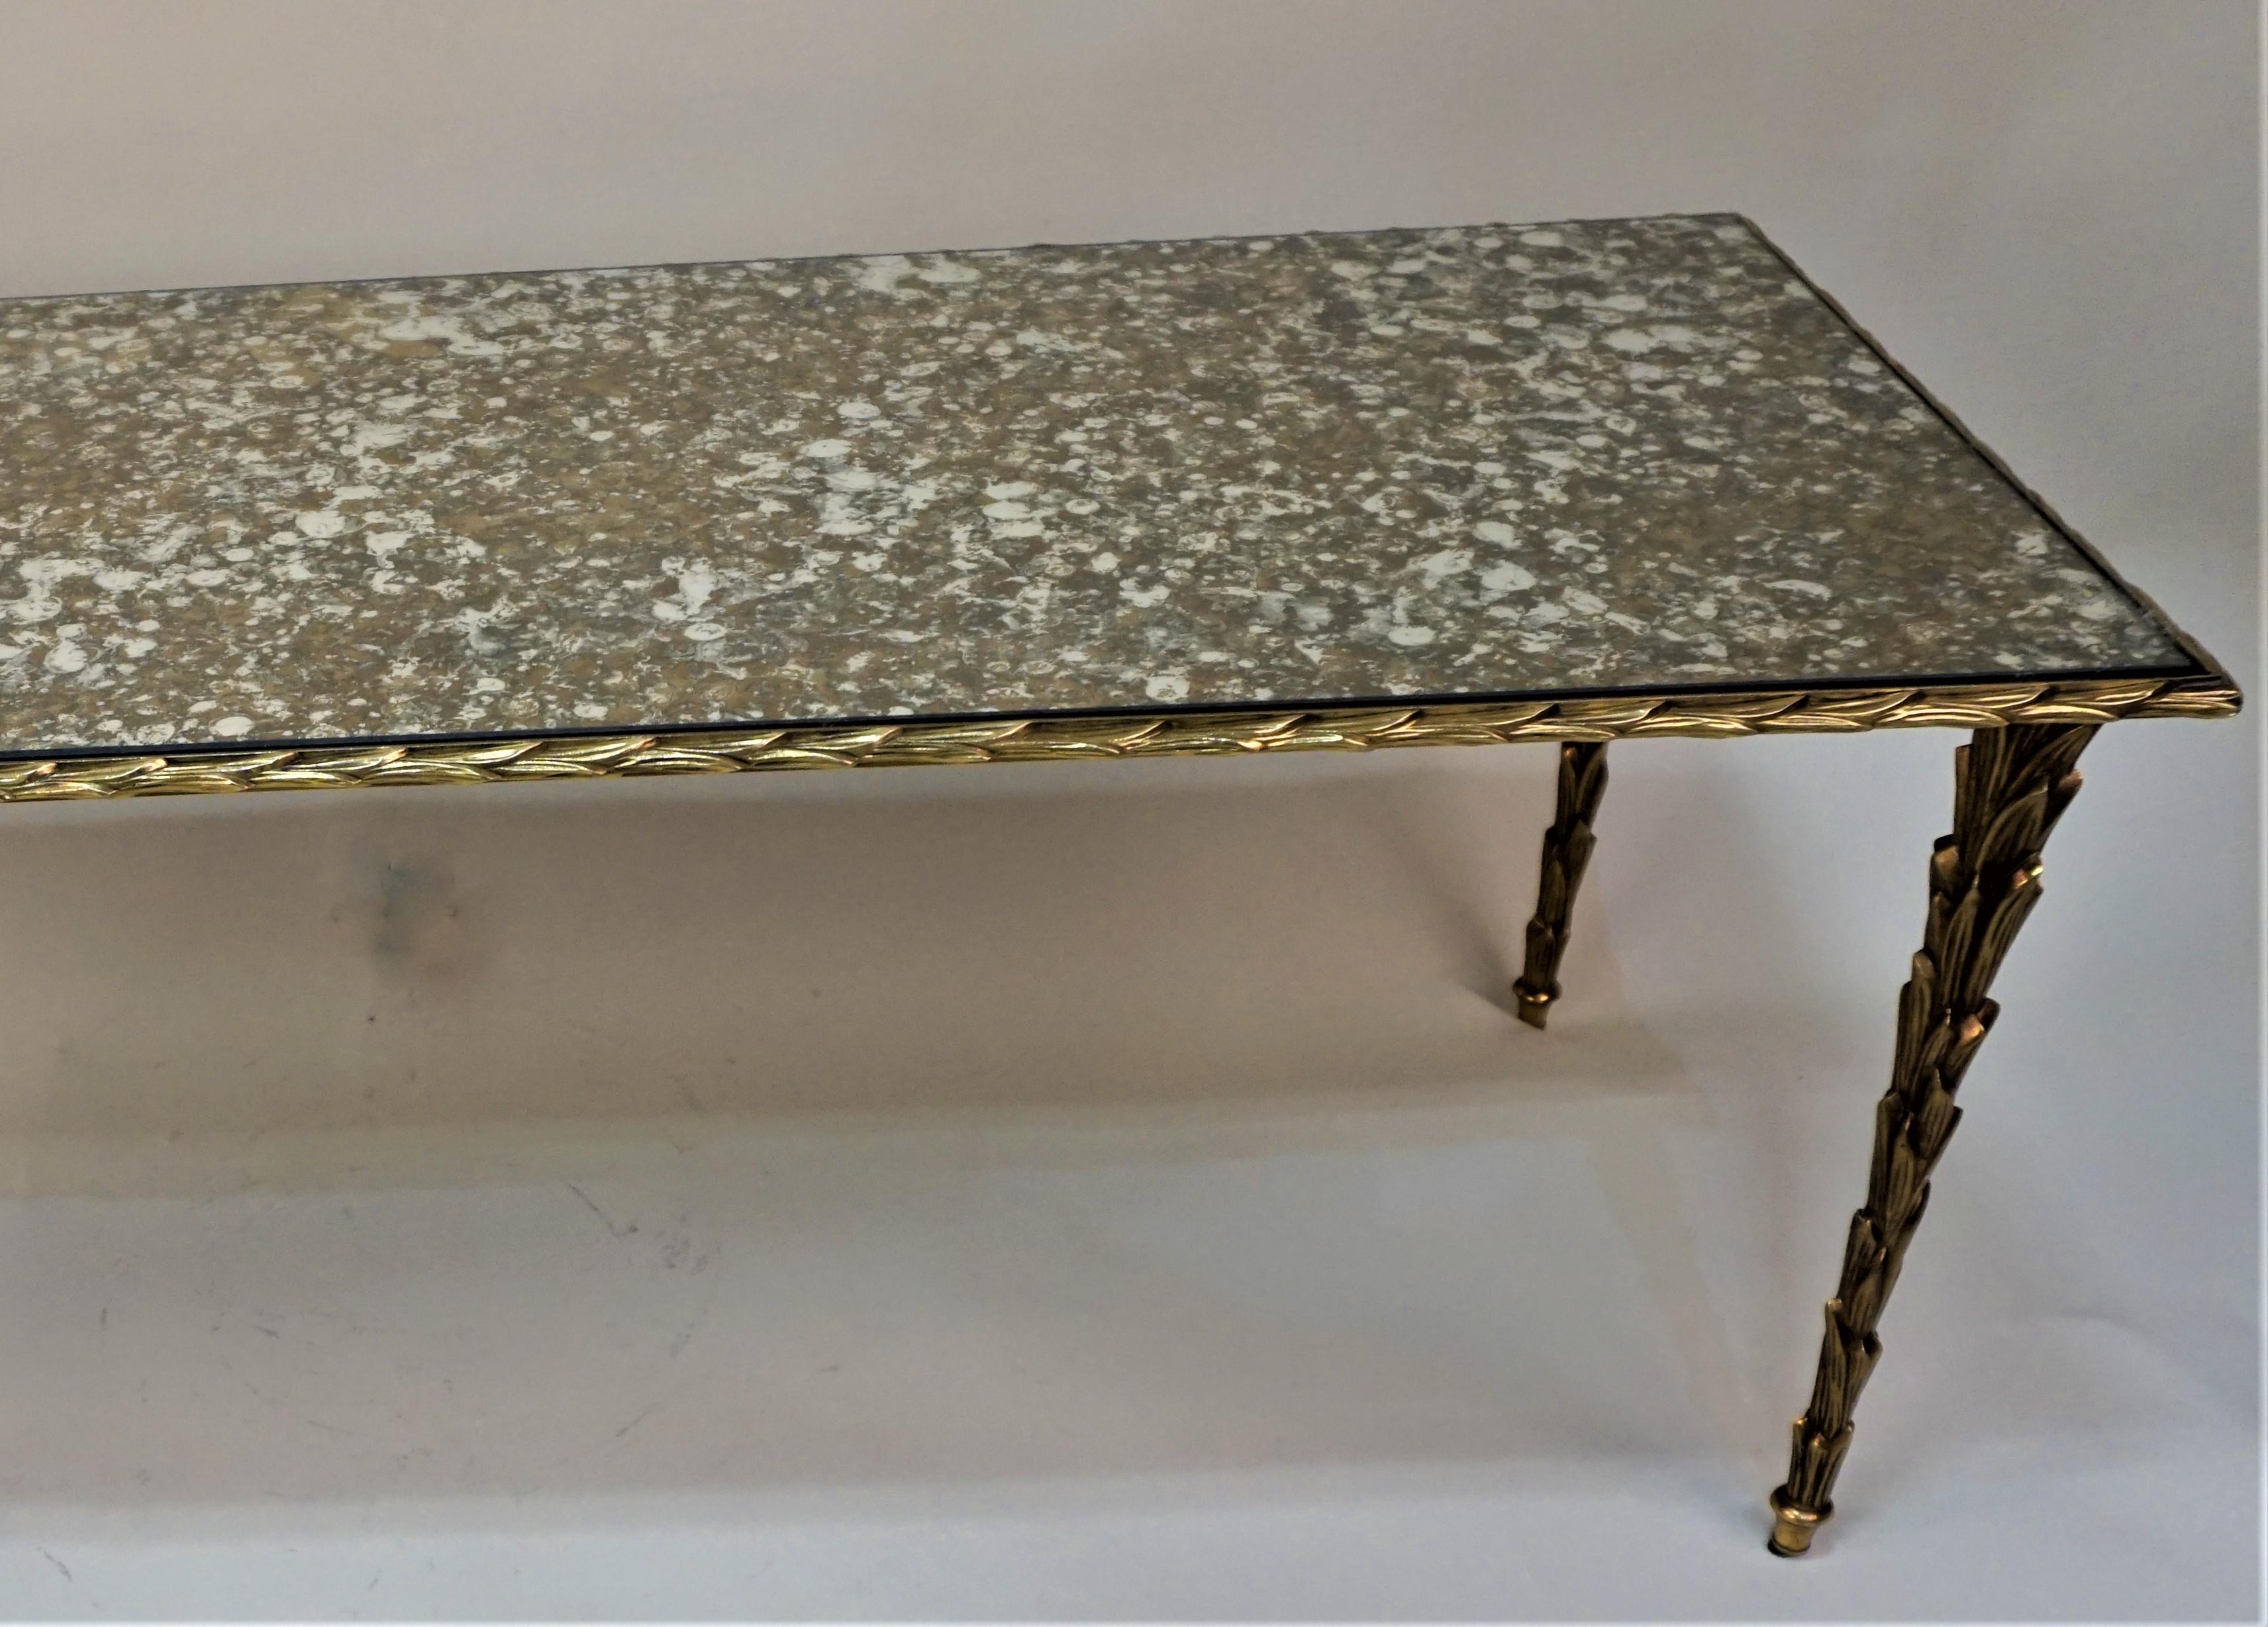 Beautiful palm tree design bronze coffee table with bronze, brown and silver mirror top.